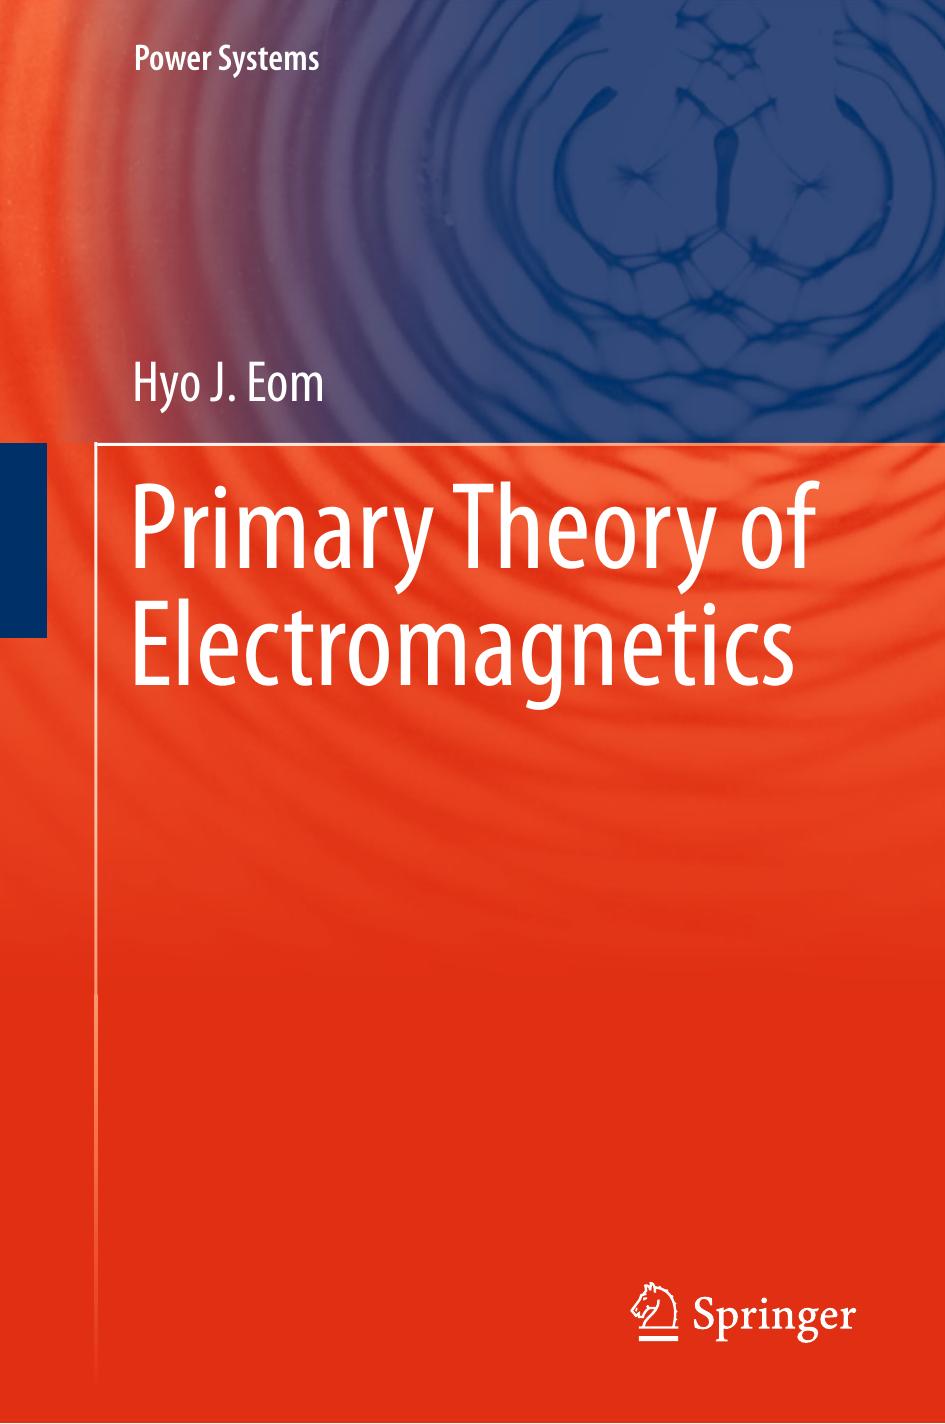 Primary Theory of Electromagnetics 2013 ( PDFDrive.com ) (1)